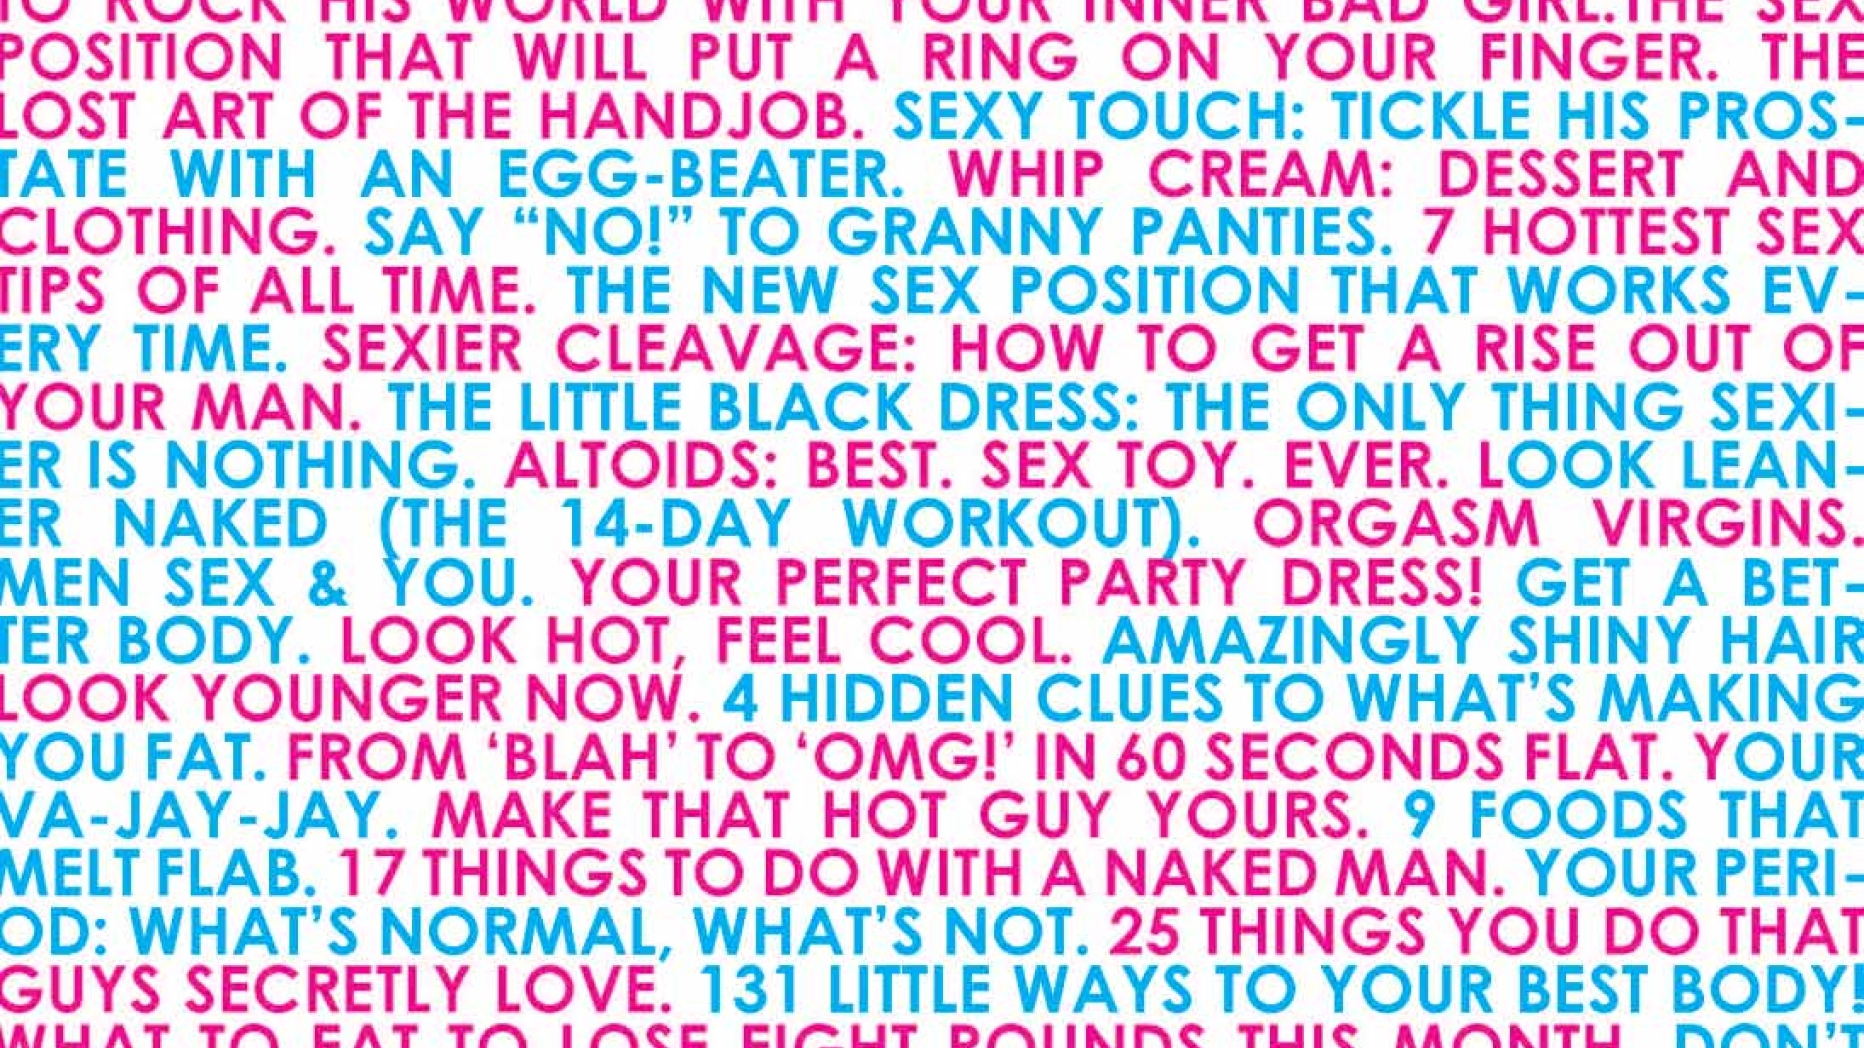 Text based piece in blue and magenta featuring snippets from the covers of women's magazines about sex and relationships.